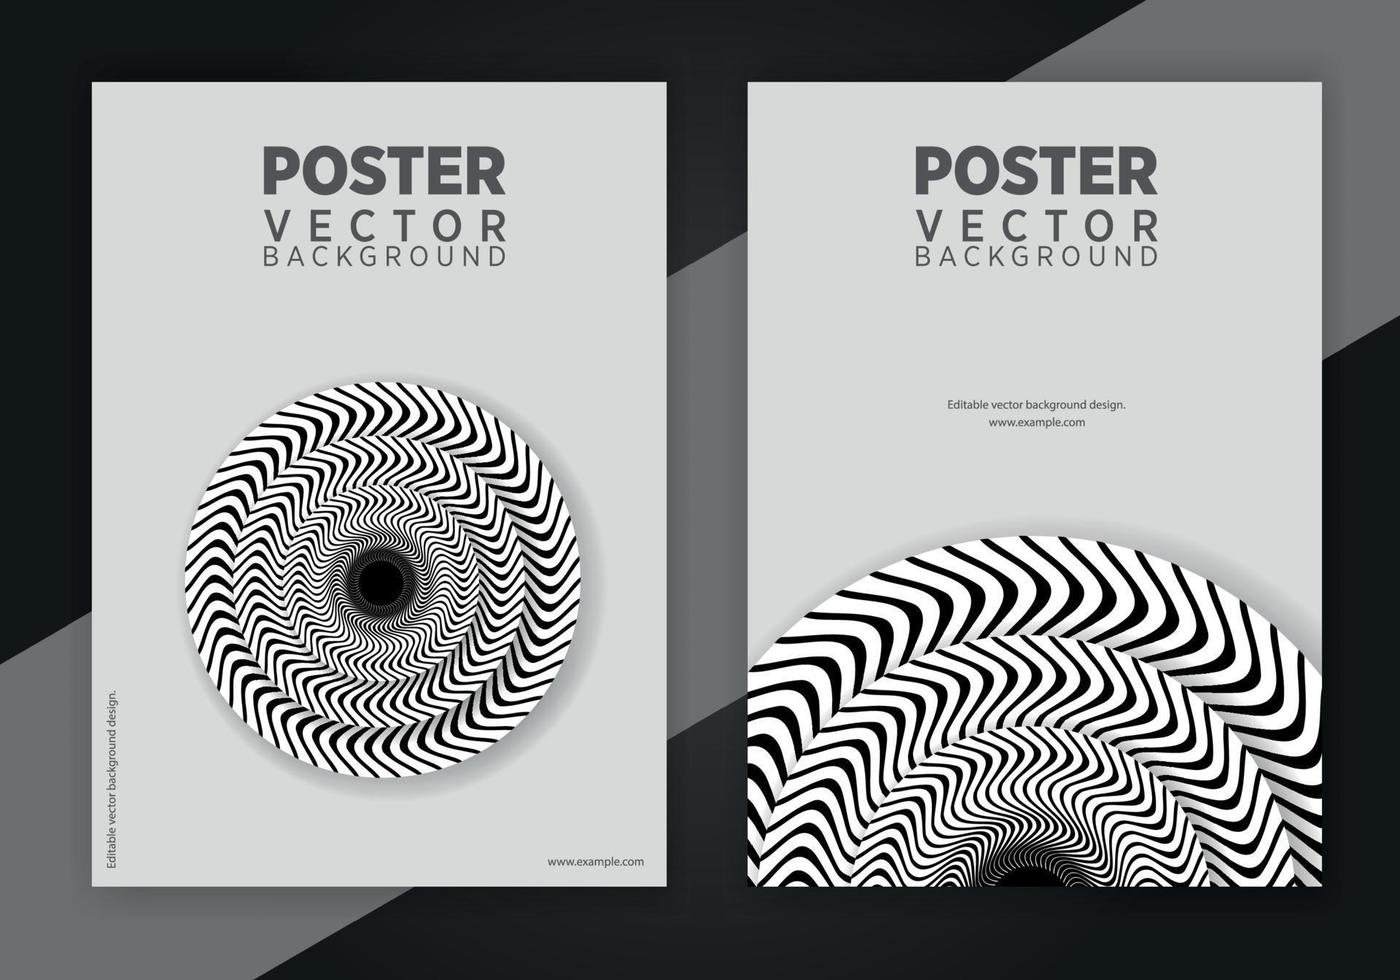 Trendy abstract glitch art poster set. Vector cover templates with abstract waves, geometric shapes in bauhaus, memphis, hipster style. Design background for flyers, placards, brochures, posters